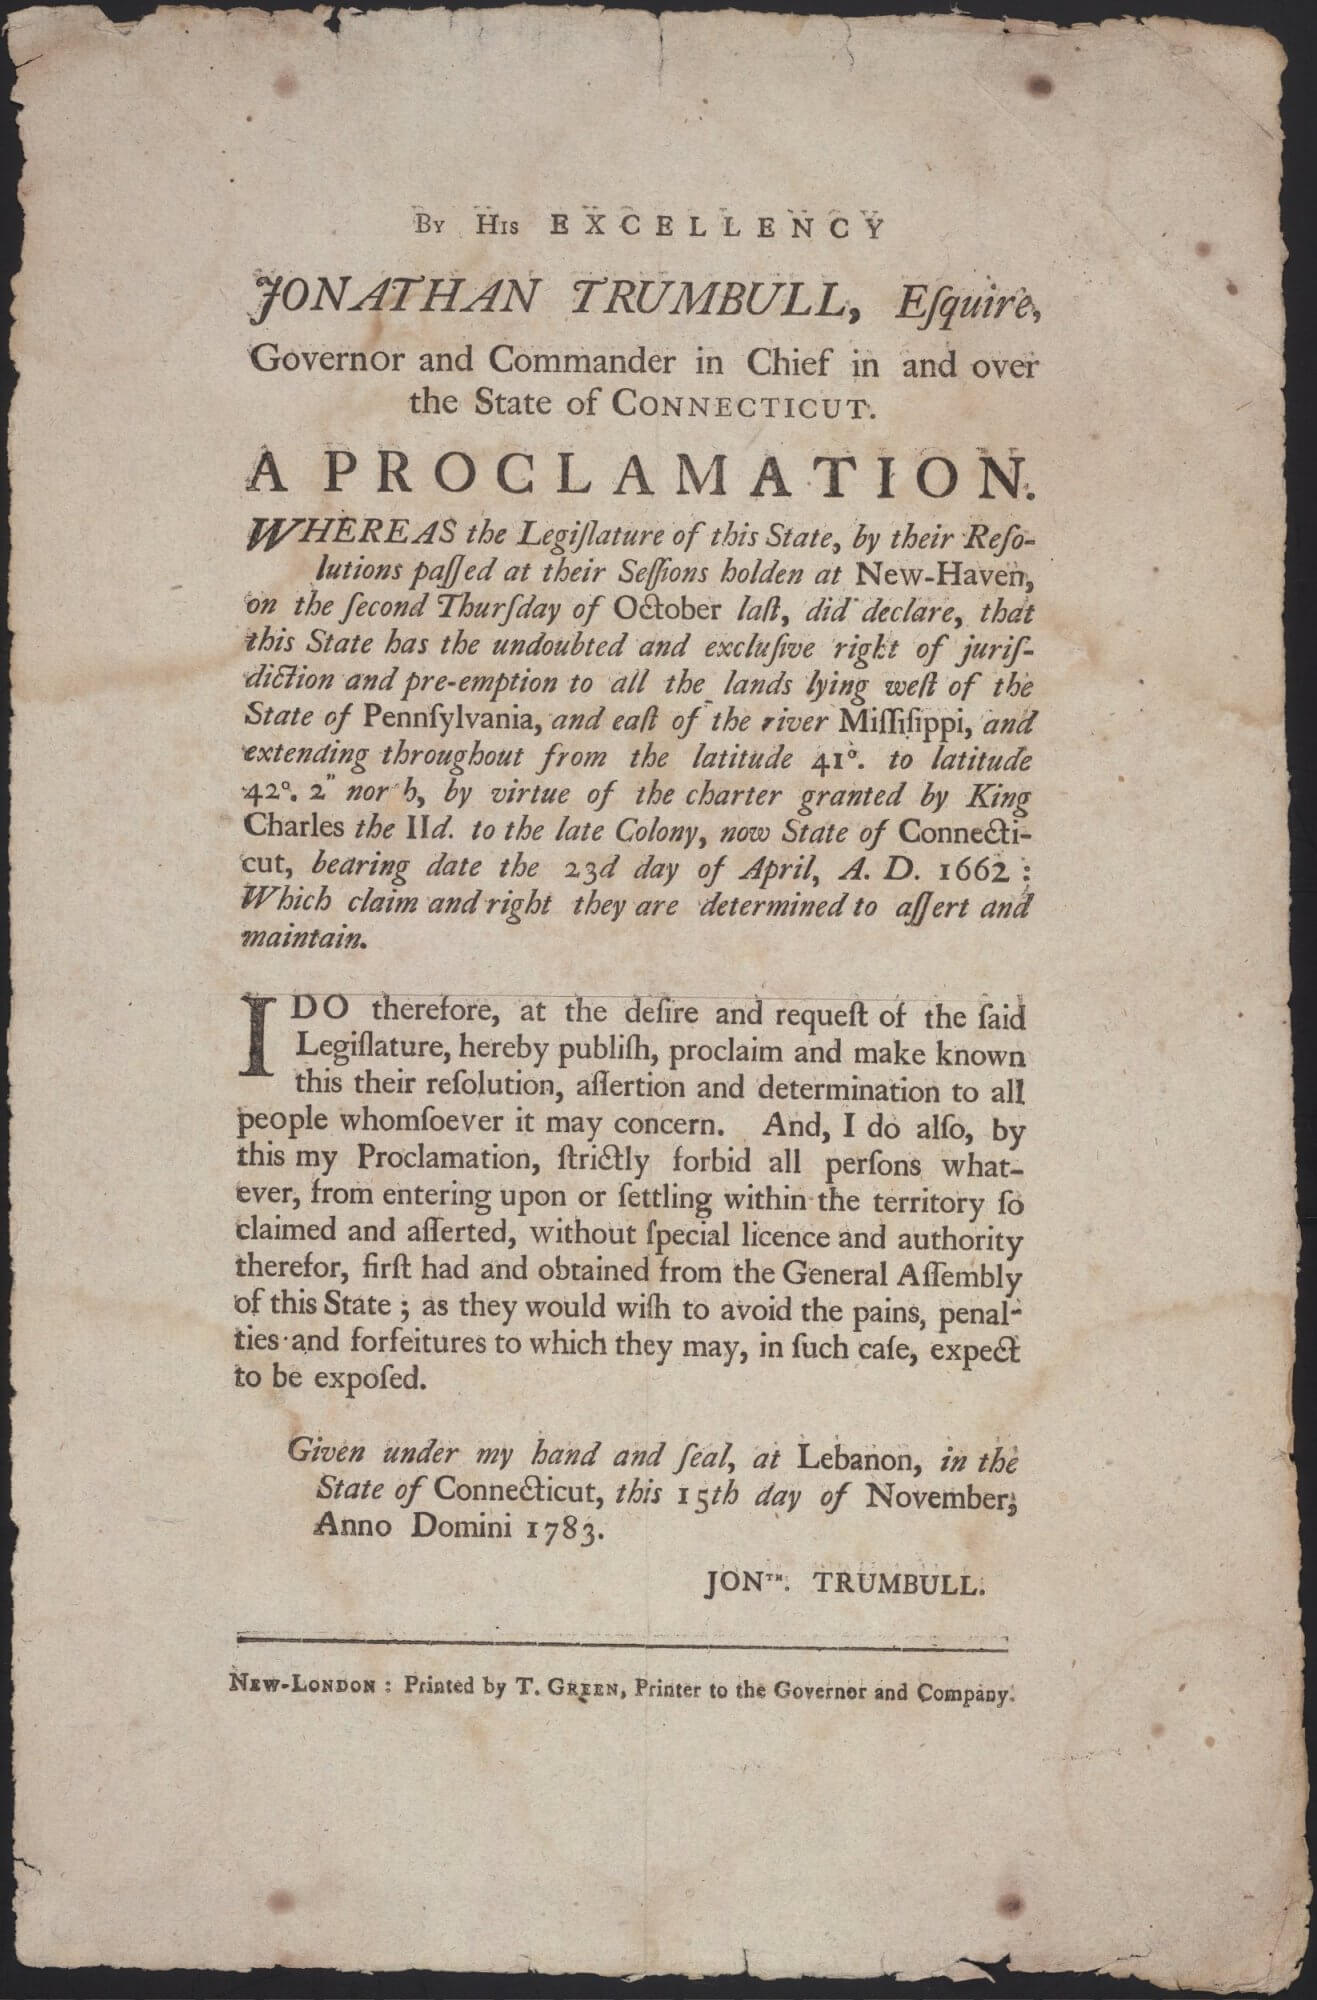 If you look closely at this broadside, you might see that the text at the top and bottom have light shadows---a faint double impression caused by an accidental bounce of the paper on the inked type